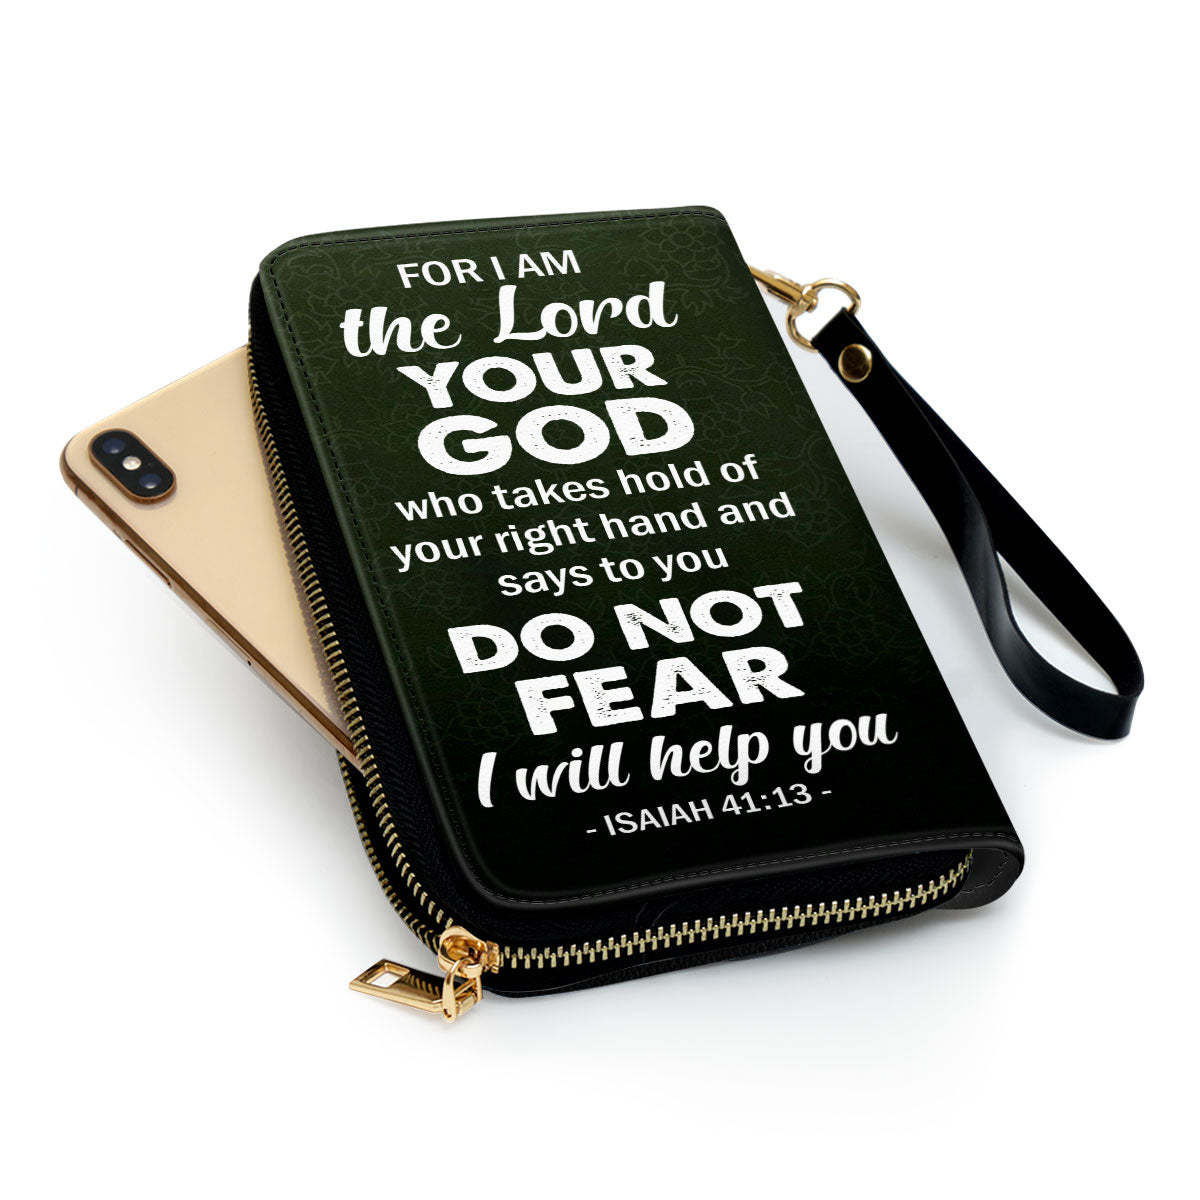 Isaiah 4113 Christ Gifts For Women Of God I Will Help You Clutch Purse For Women - Personalized Name - Christian Gifts For Women